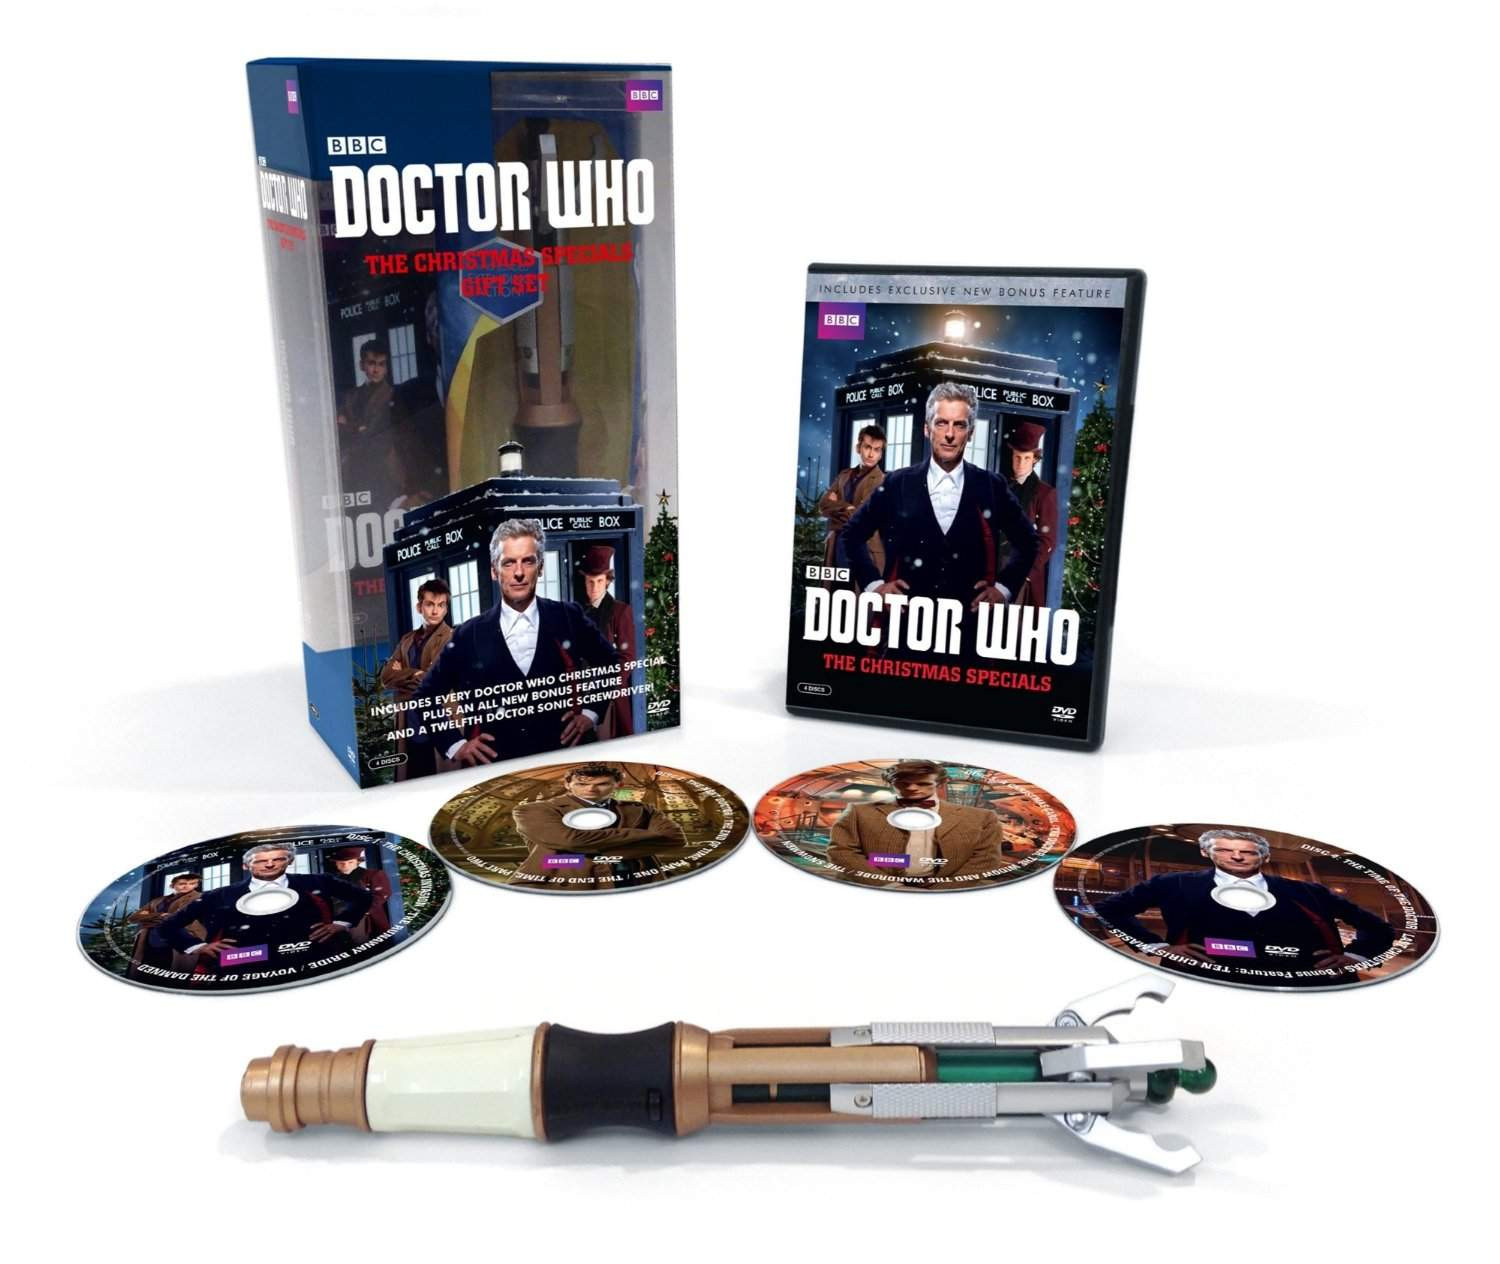 Christmas Gift Ideas For Doctors
 Top 10 Best Doctor Who Gift Ideas